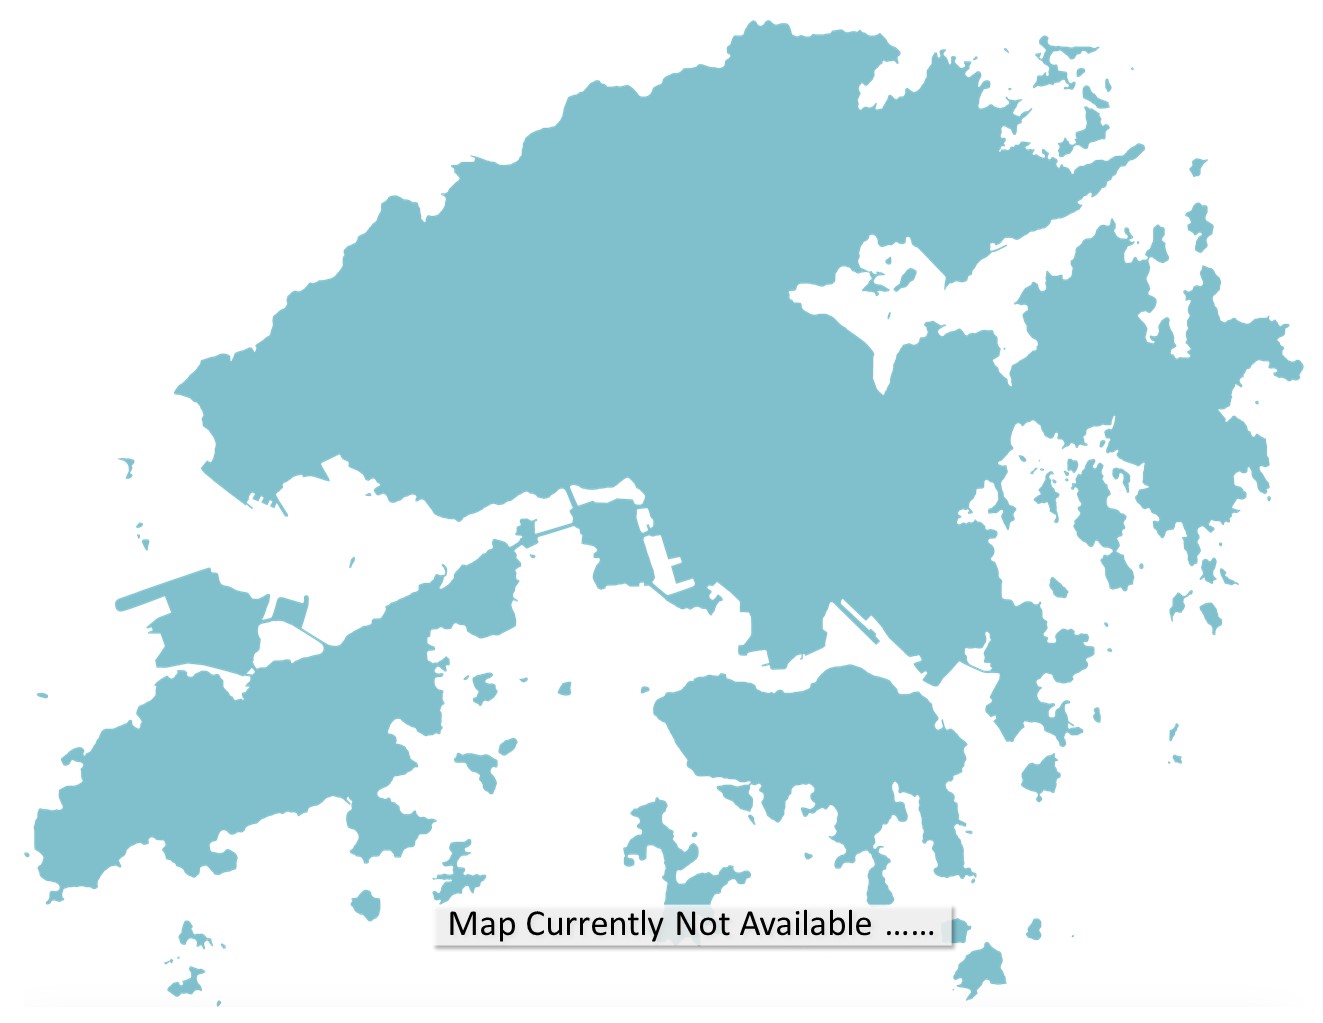 geographical map showing the current selected project